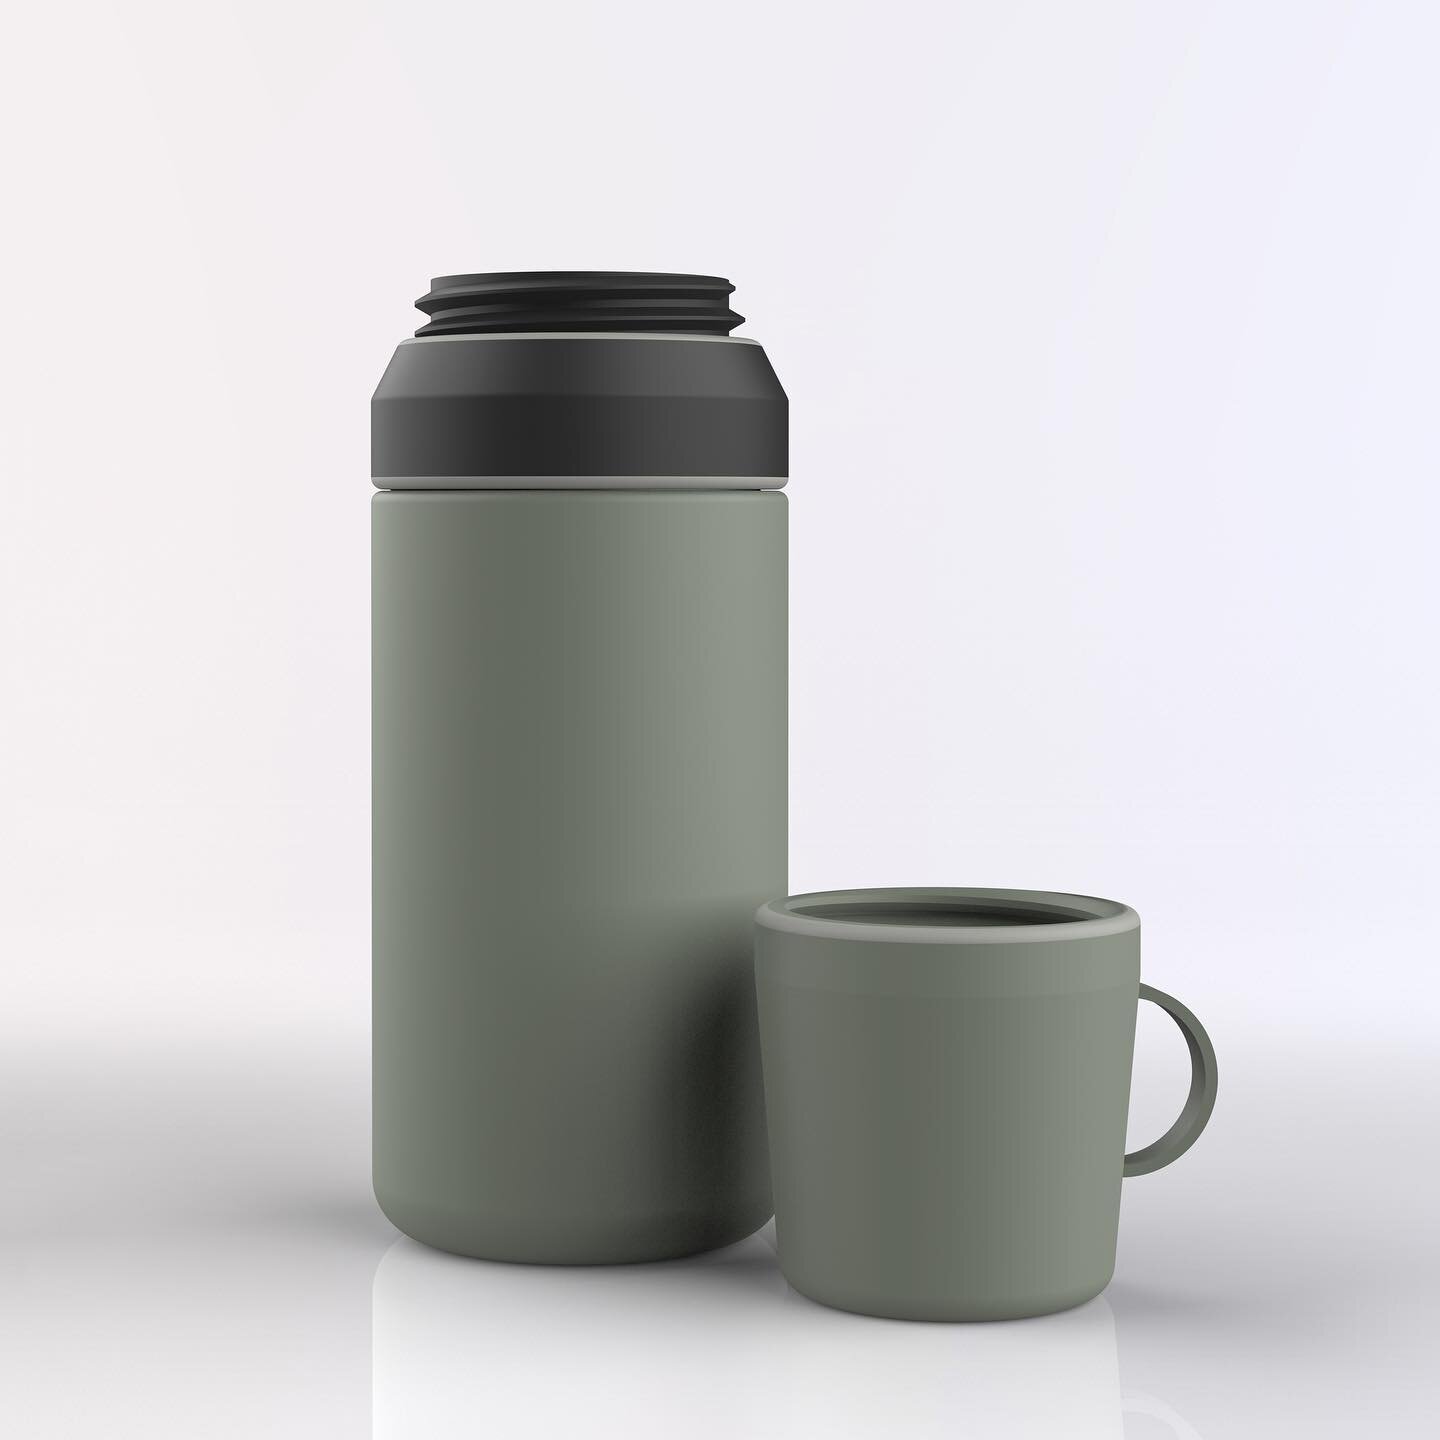 Thermos design by Melia Dowd @dowd.designs from PD 430: Solidworks class

#uoregondesign&nbsp;&nbsp;#uoartdesign&nbsp;#uoproductdesign #PD430 #productdesign #industrialdesign